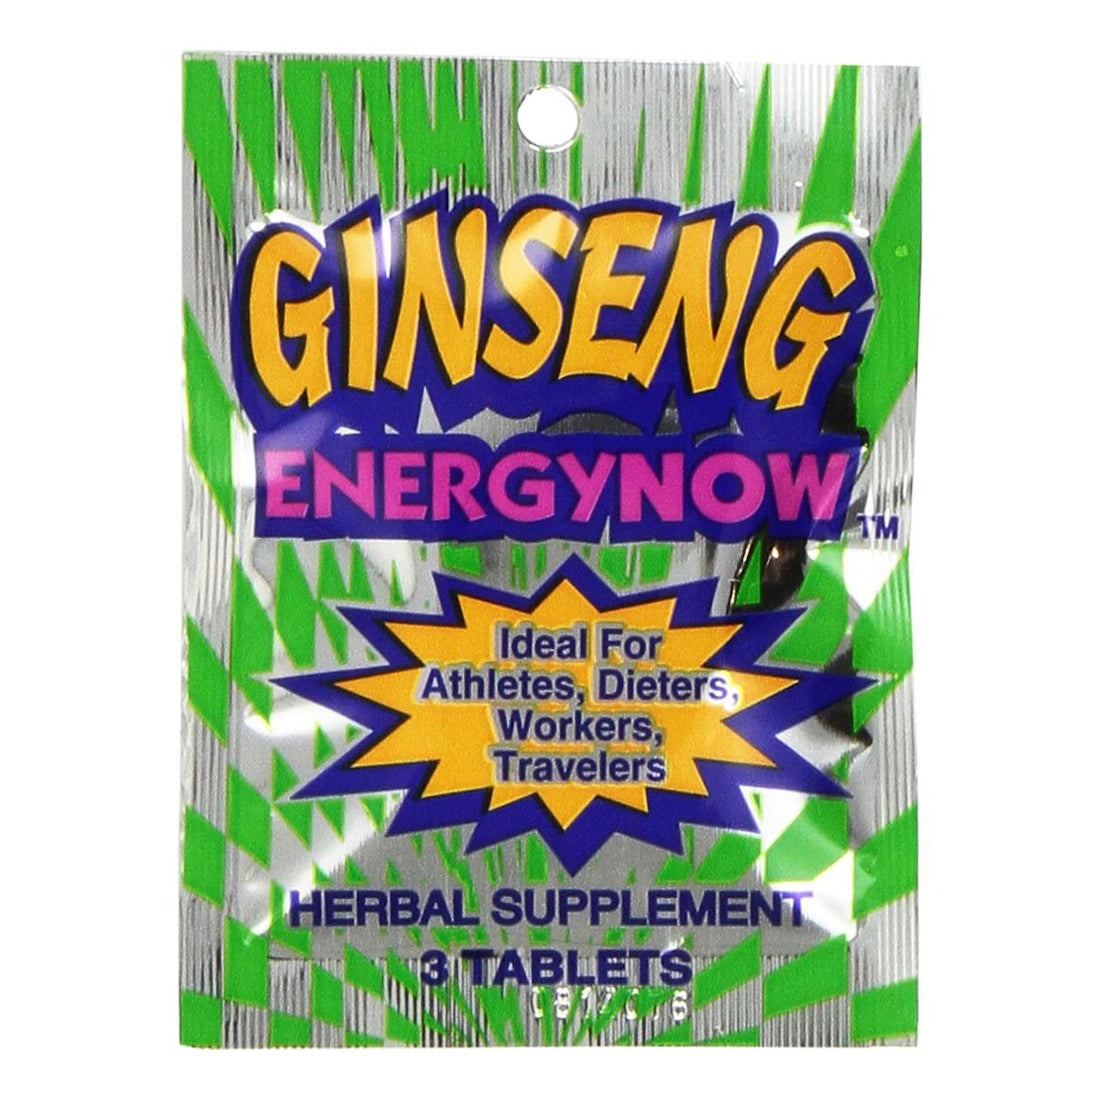 Energy Now (3 pills) Ginseng Energy Now - Ideal for Athletes, Workers, Dieters, Travelers